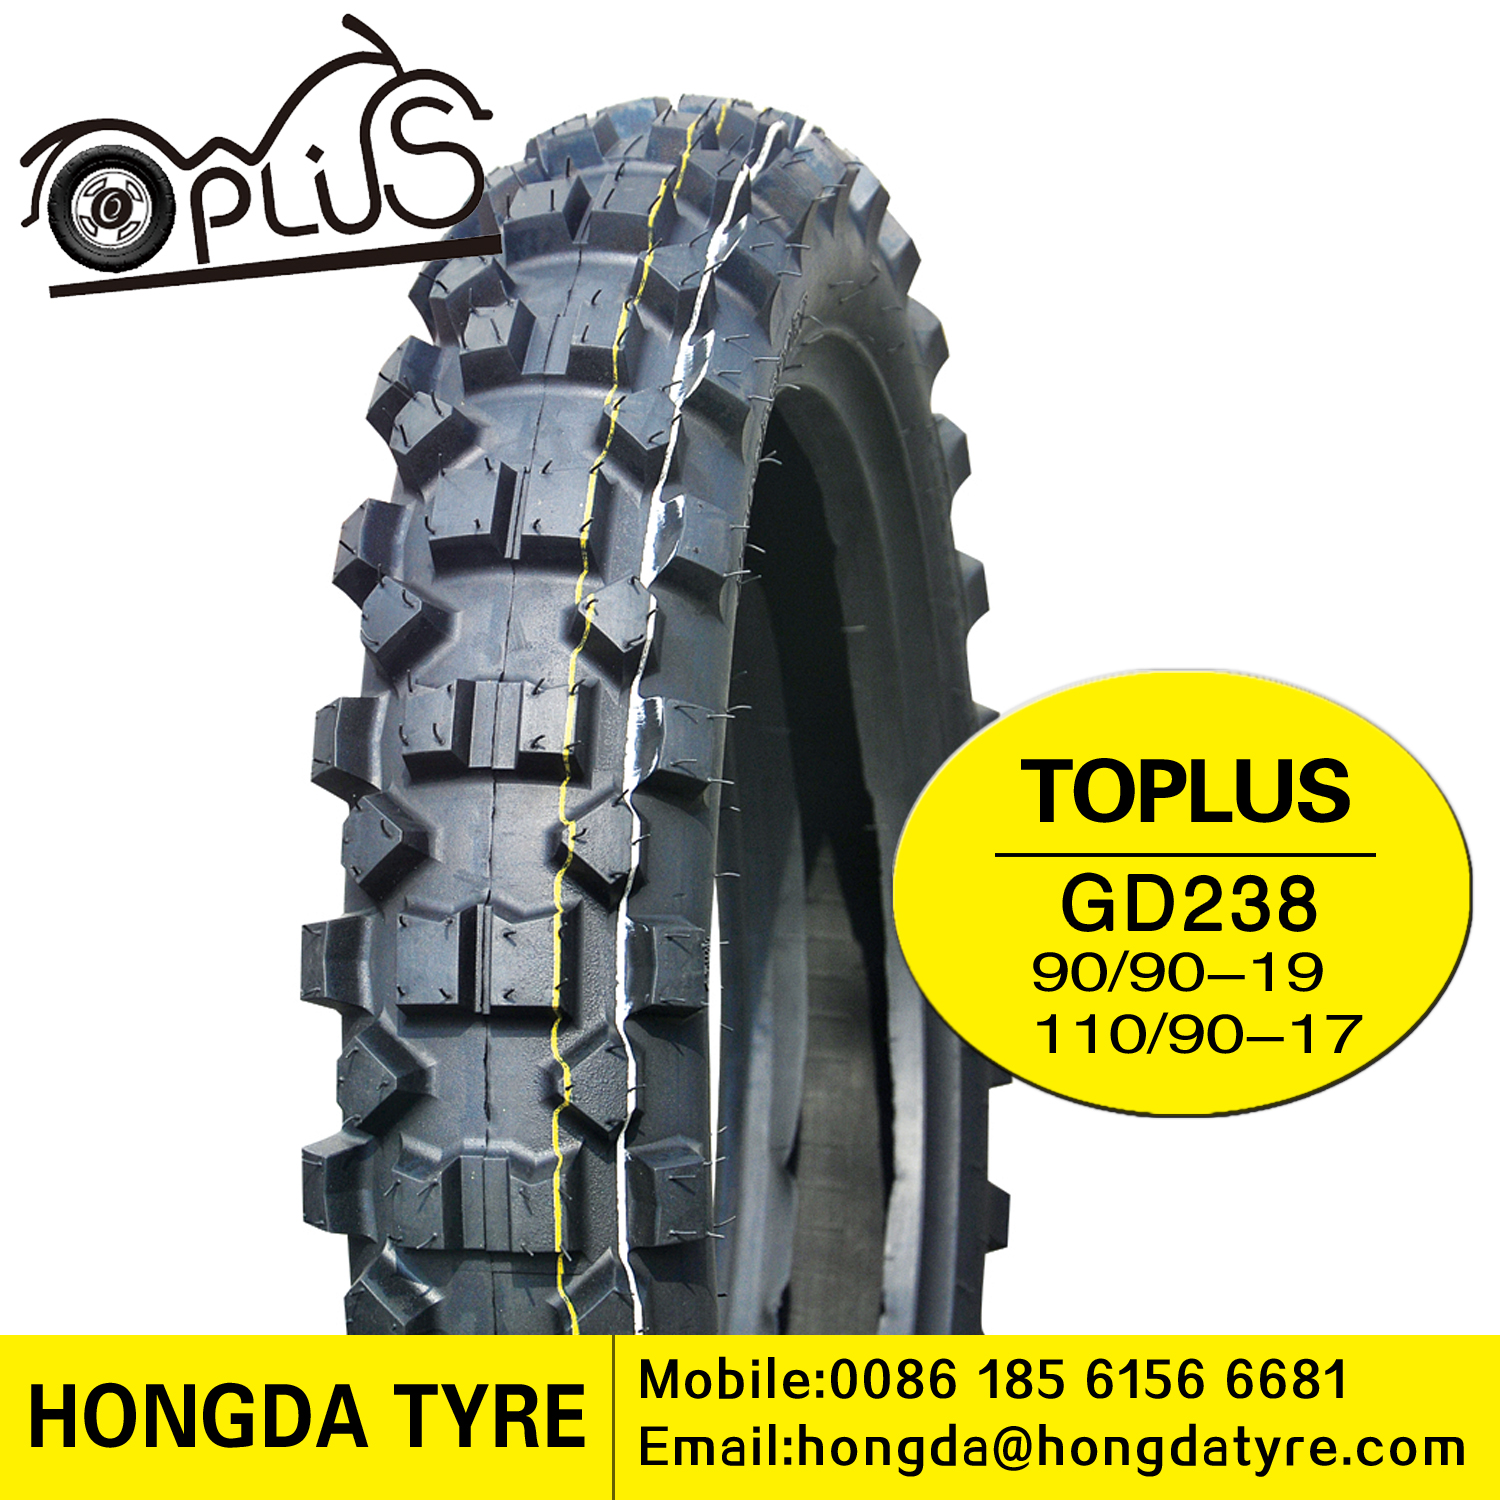 Motorcycle tyre GD238